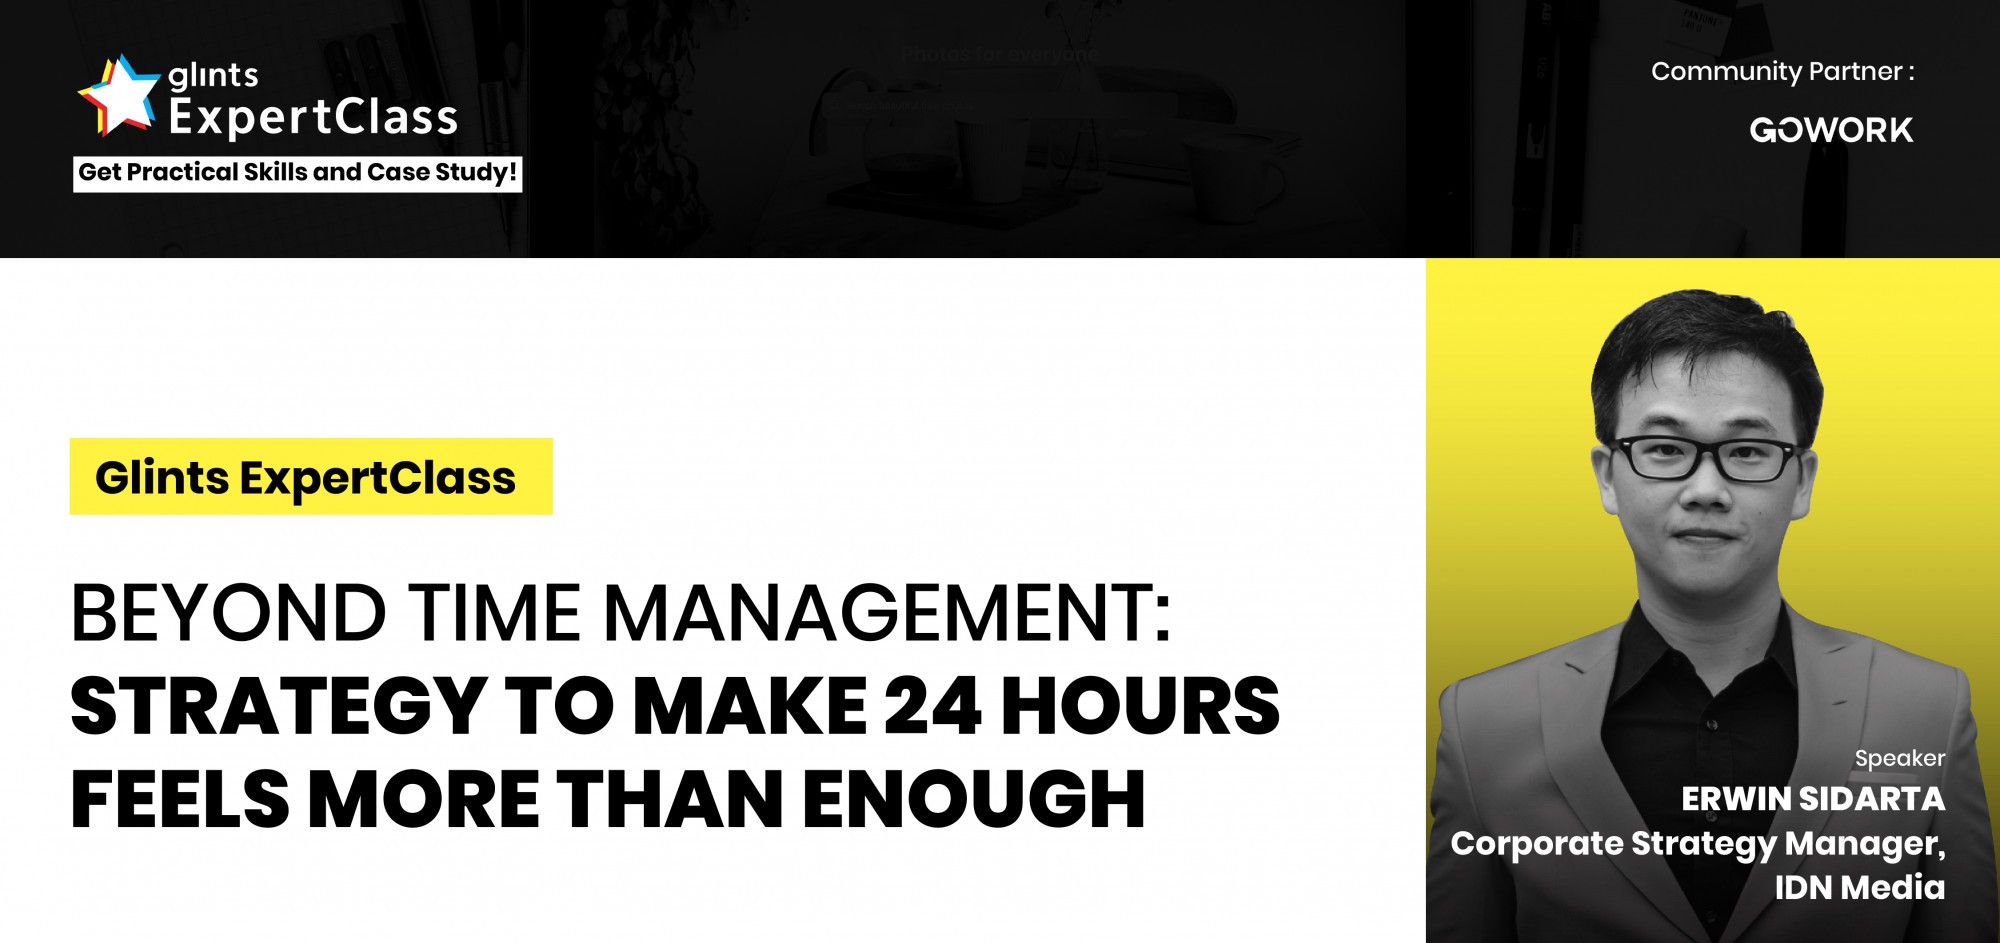 [Online Glints ExpertClass] Beyond Time Management: Strategy To Make 24 Hours Feels More Than Enough